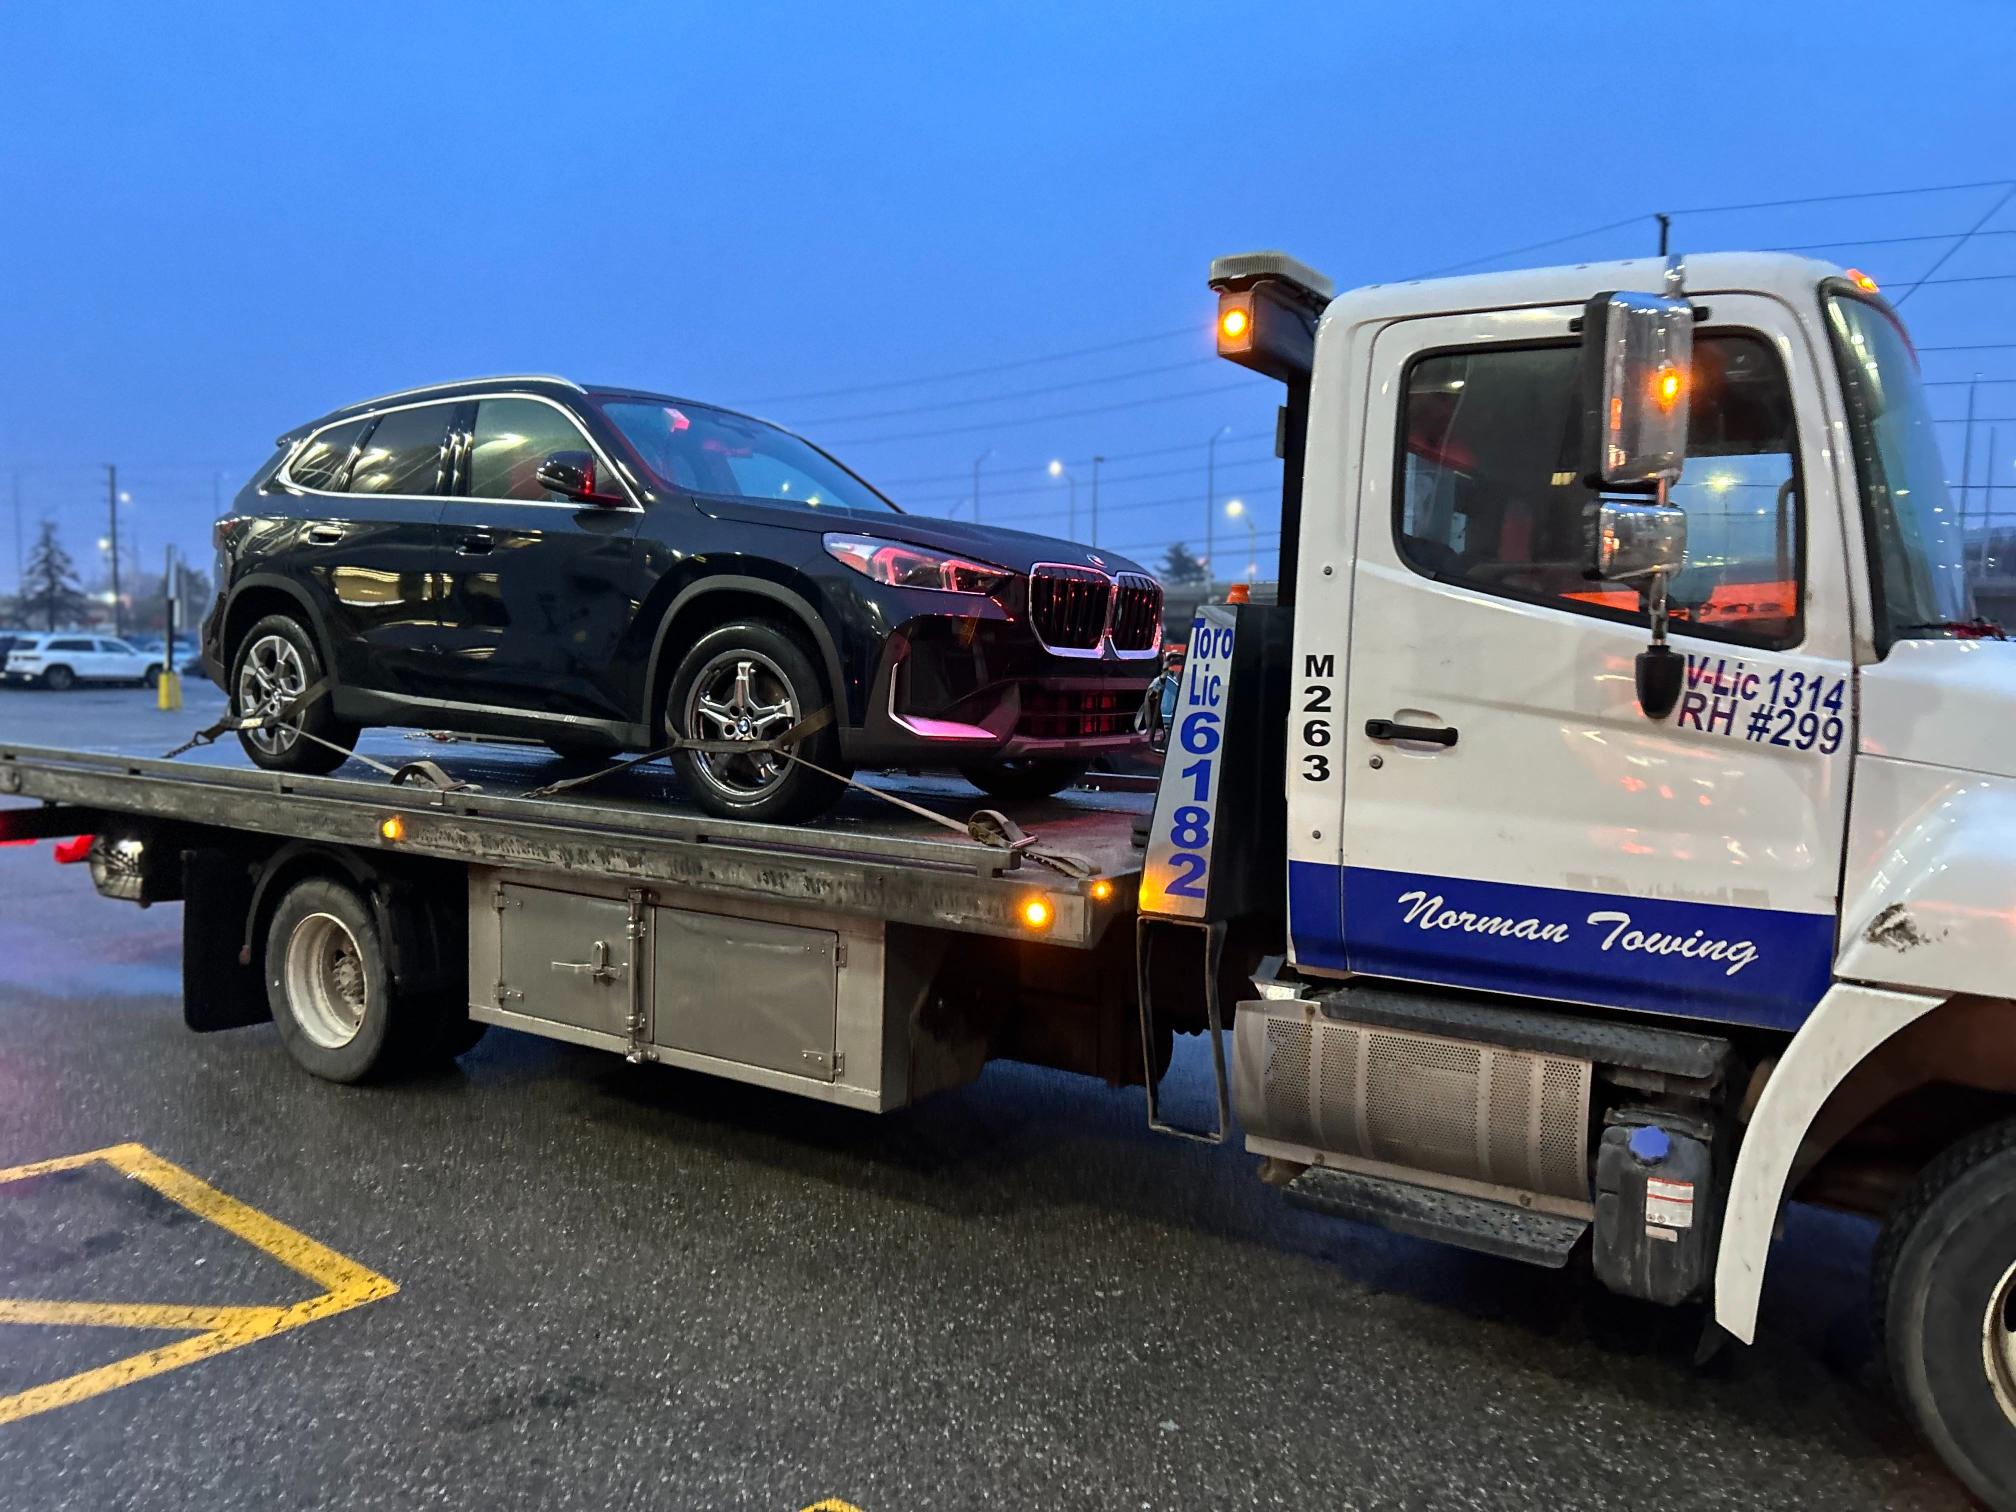 Emergency Flatbed Towing Services - Toronto & GTA